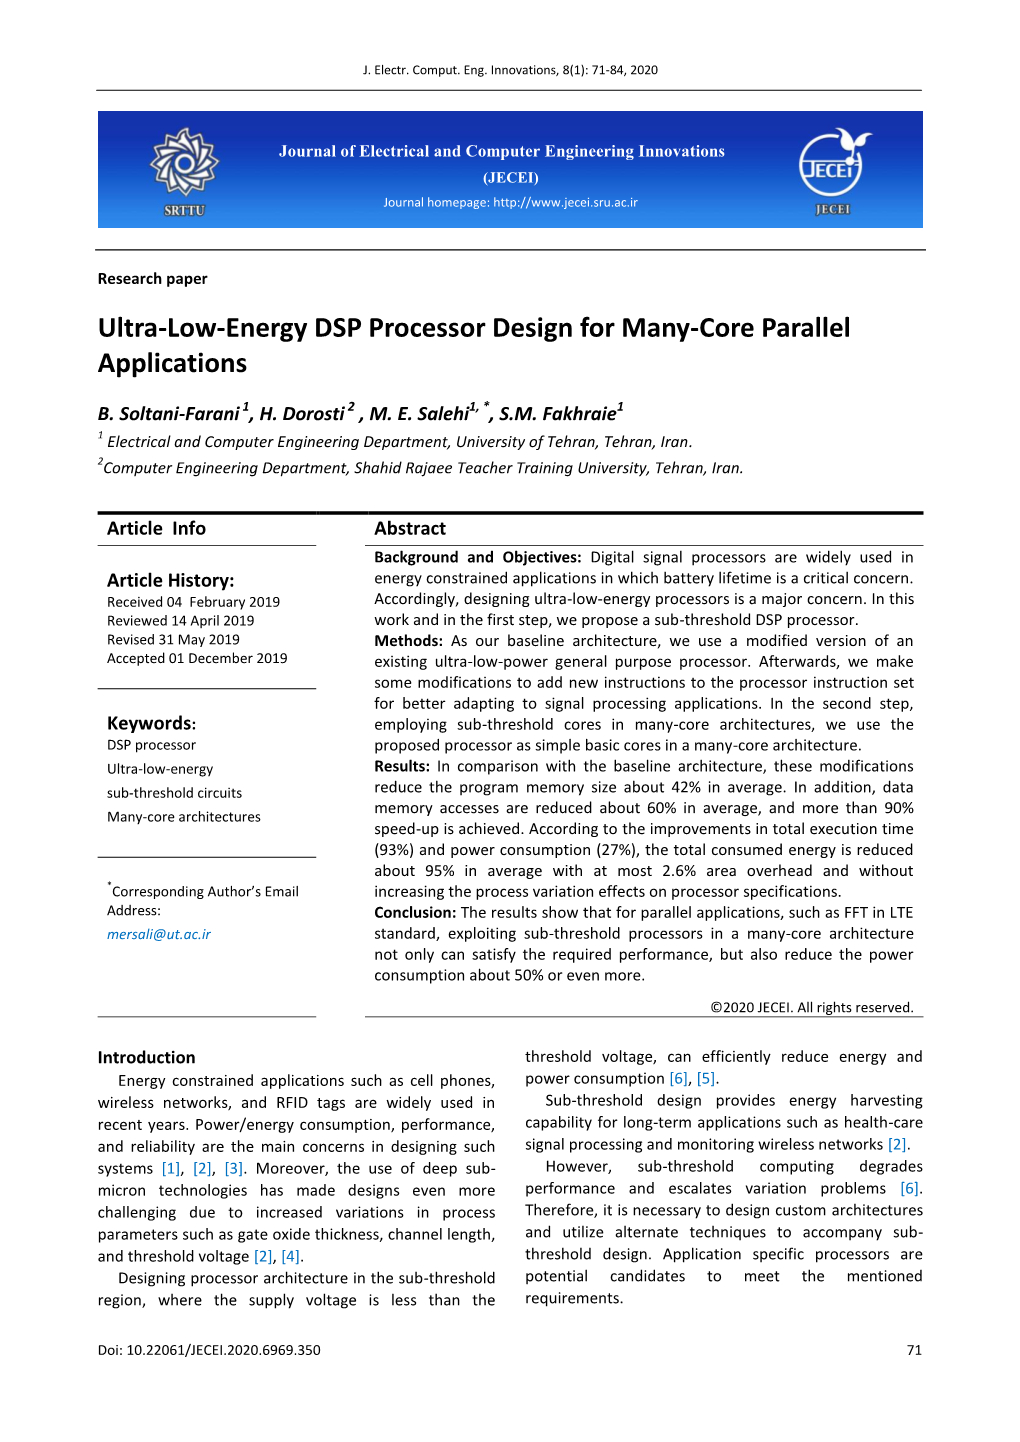 Ultra-Low-Energy DSP Processor Design for Many-Core Parallel Applications